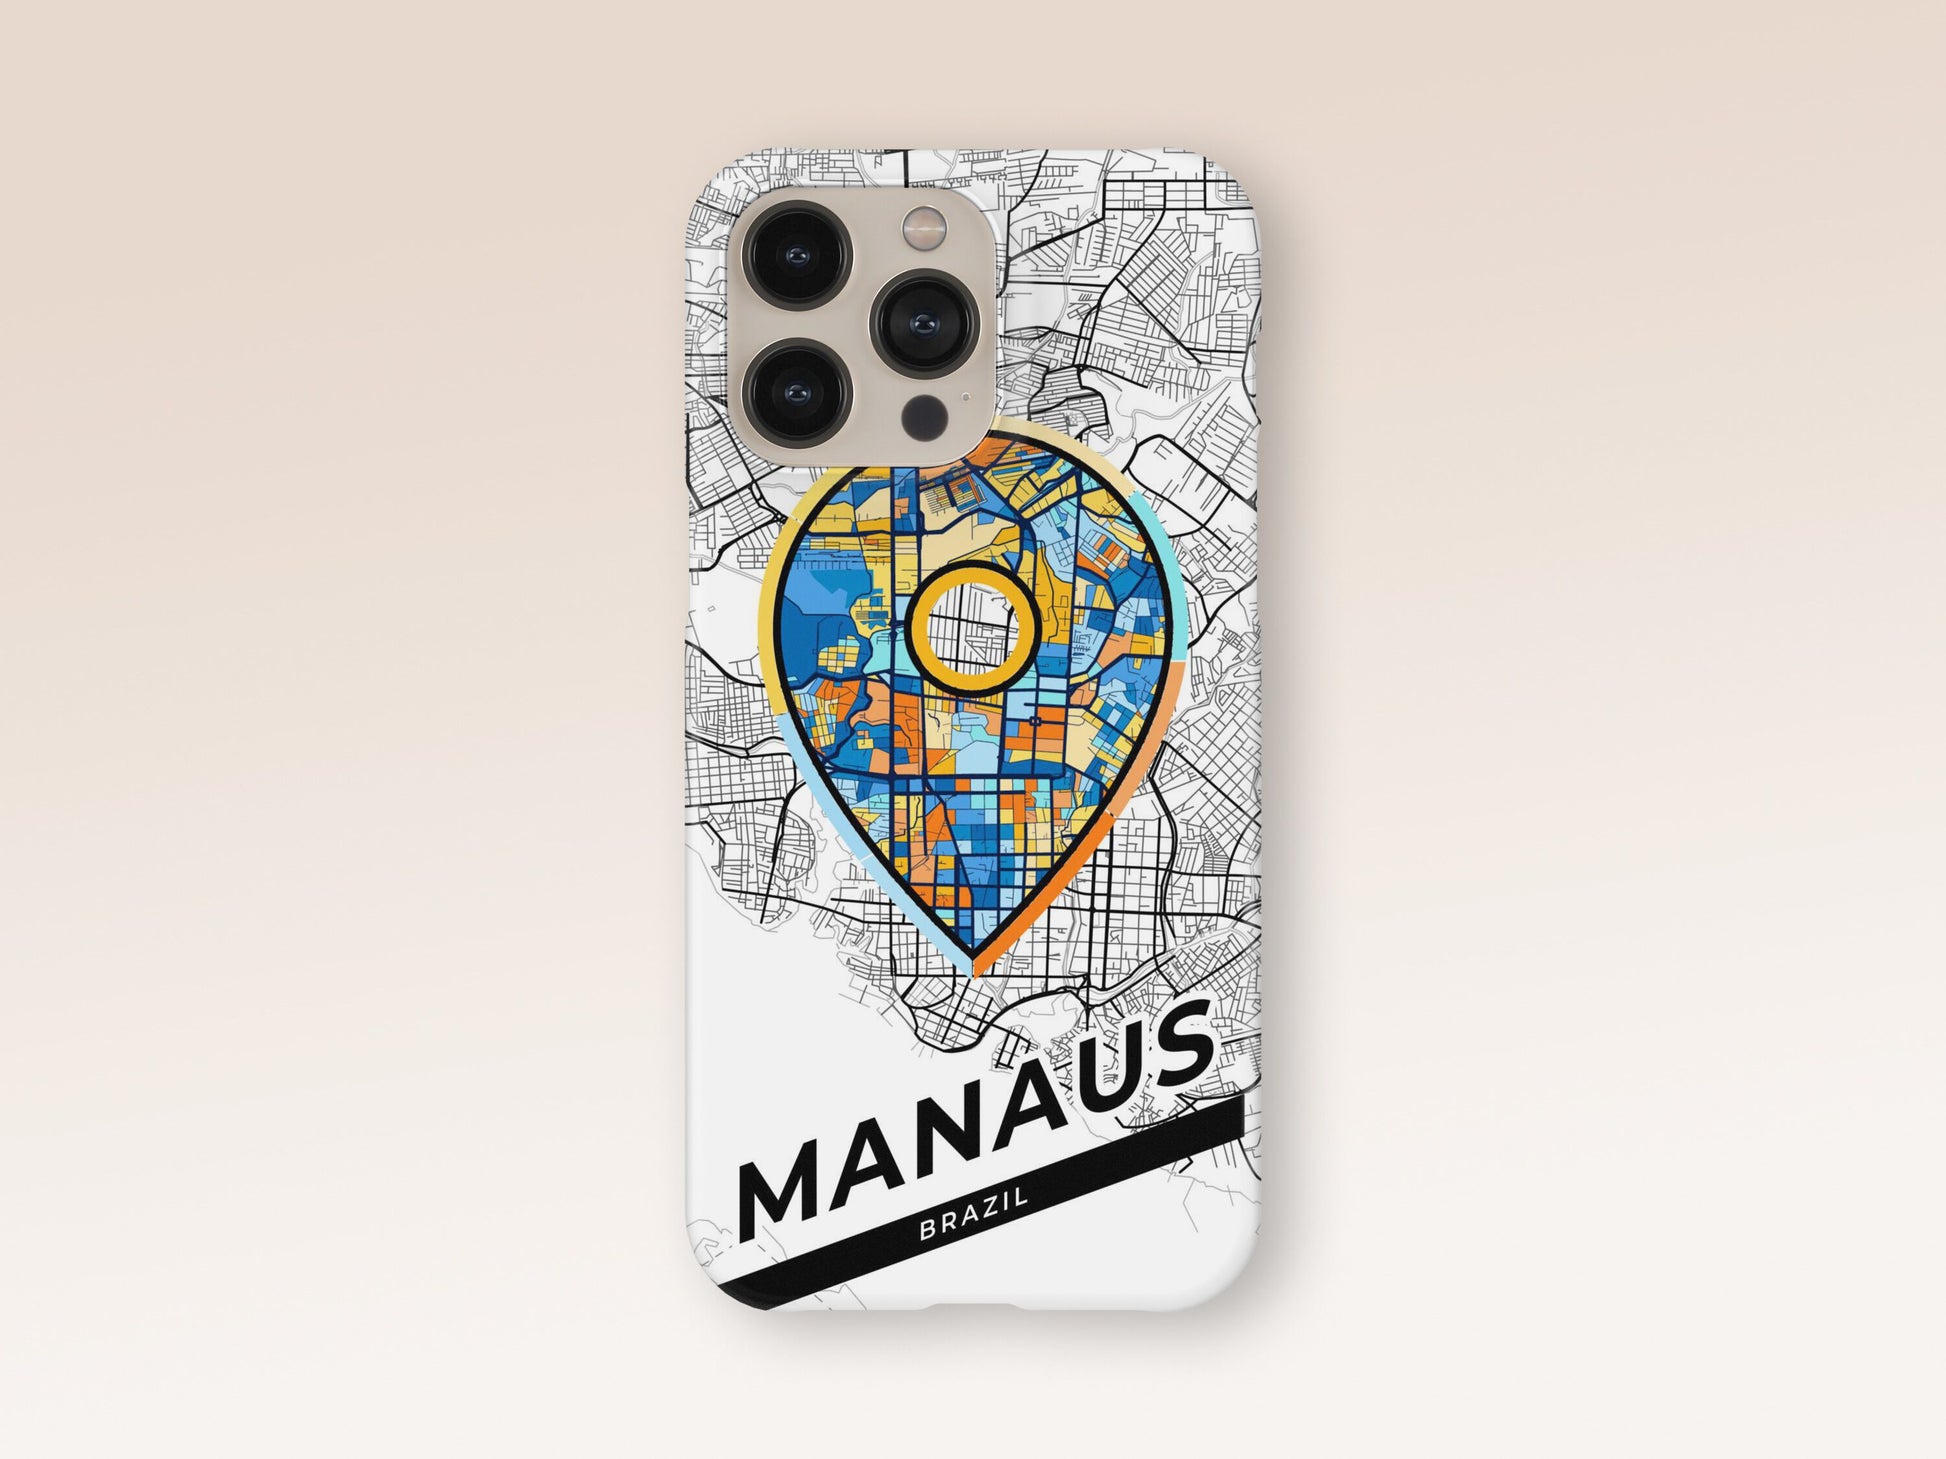 Manaus Brazil slim phone case with colorful icon. Birthday, wedding or housewarming gift. Couple match cases. 1